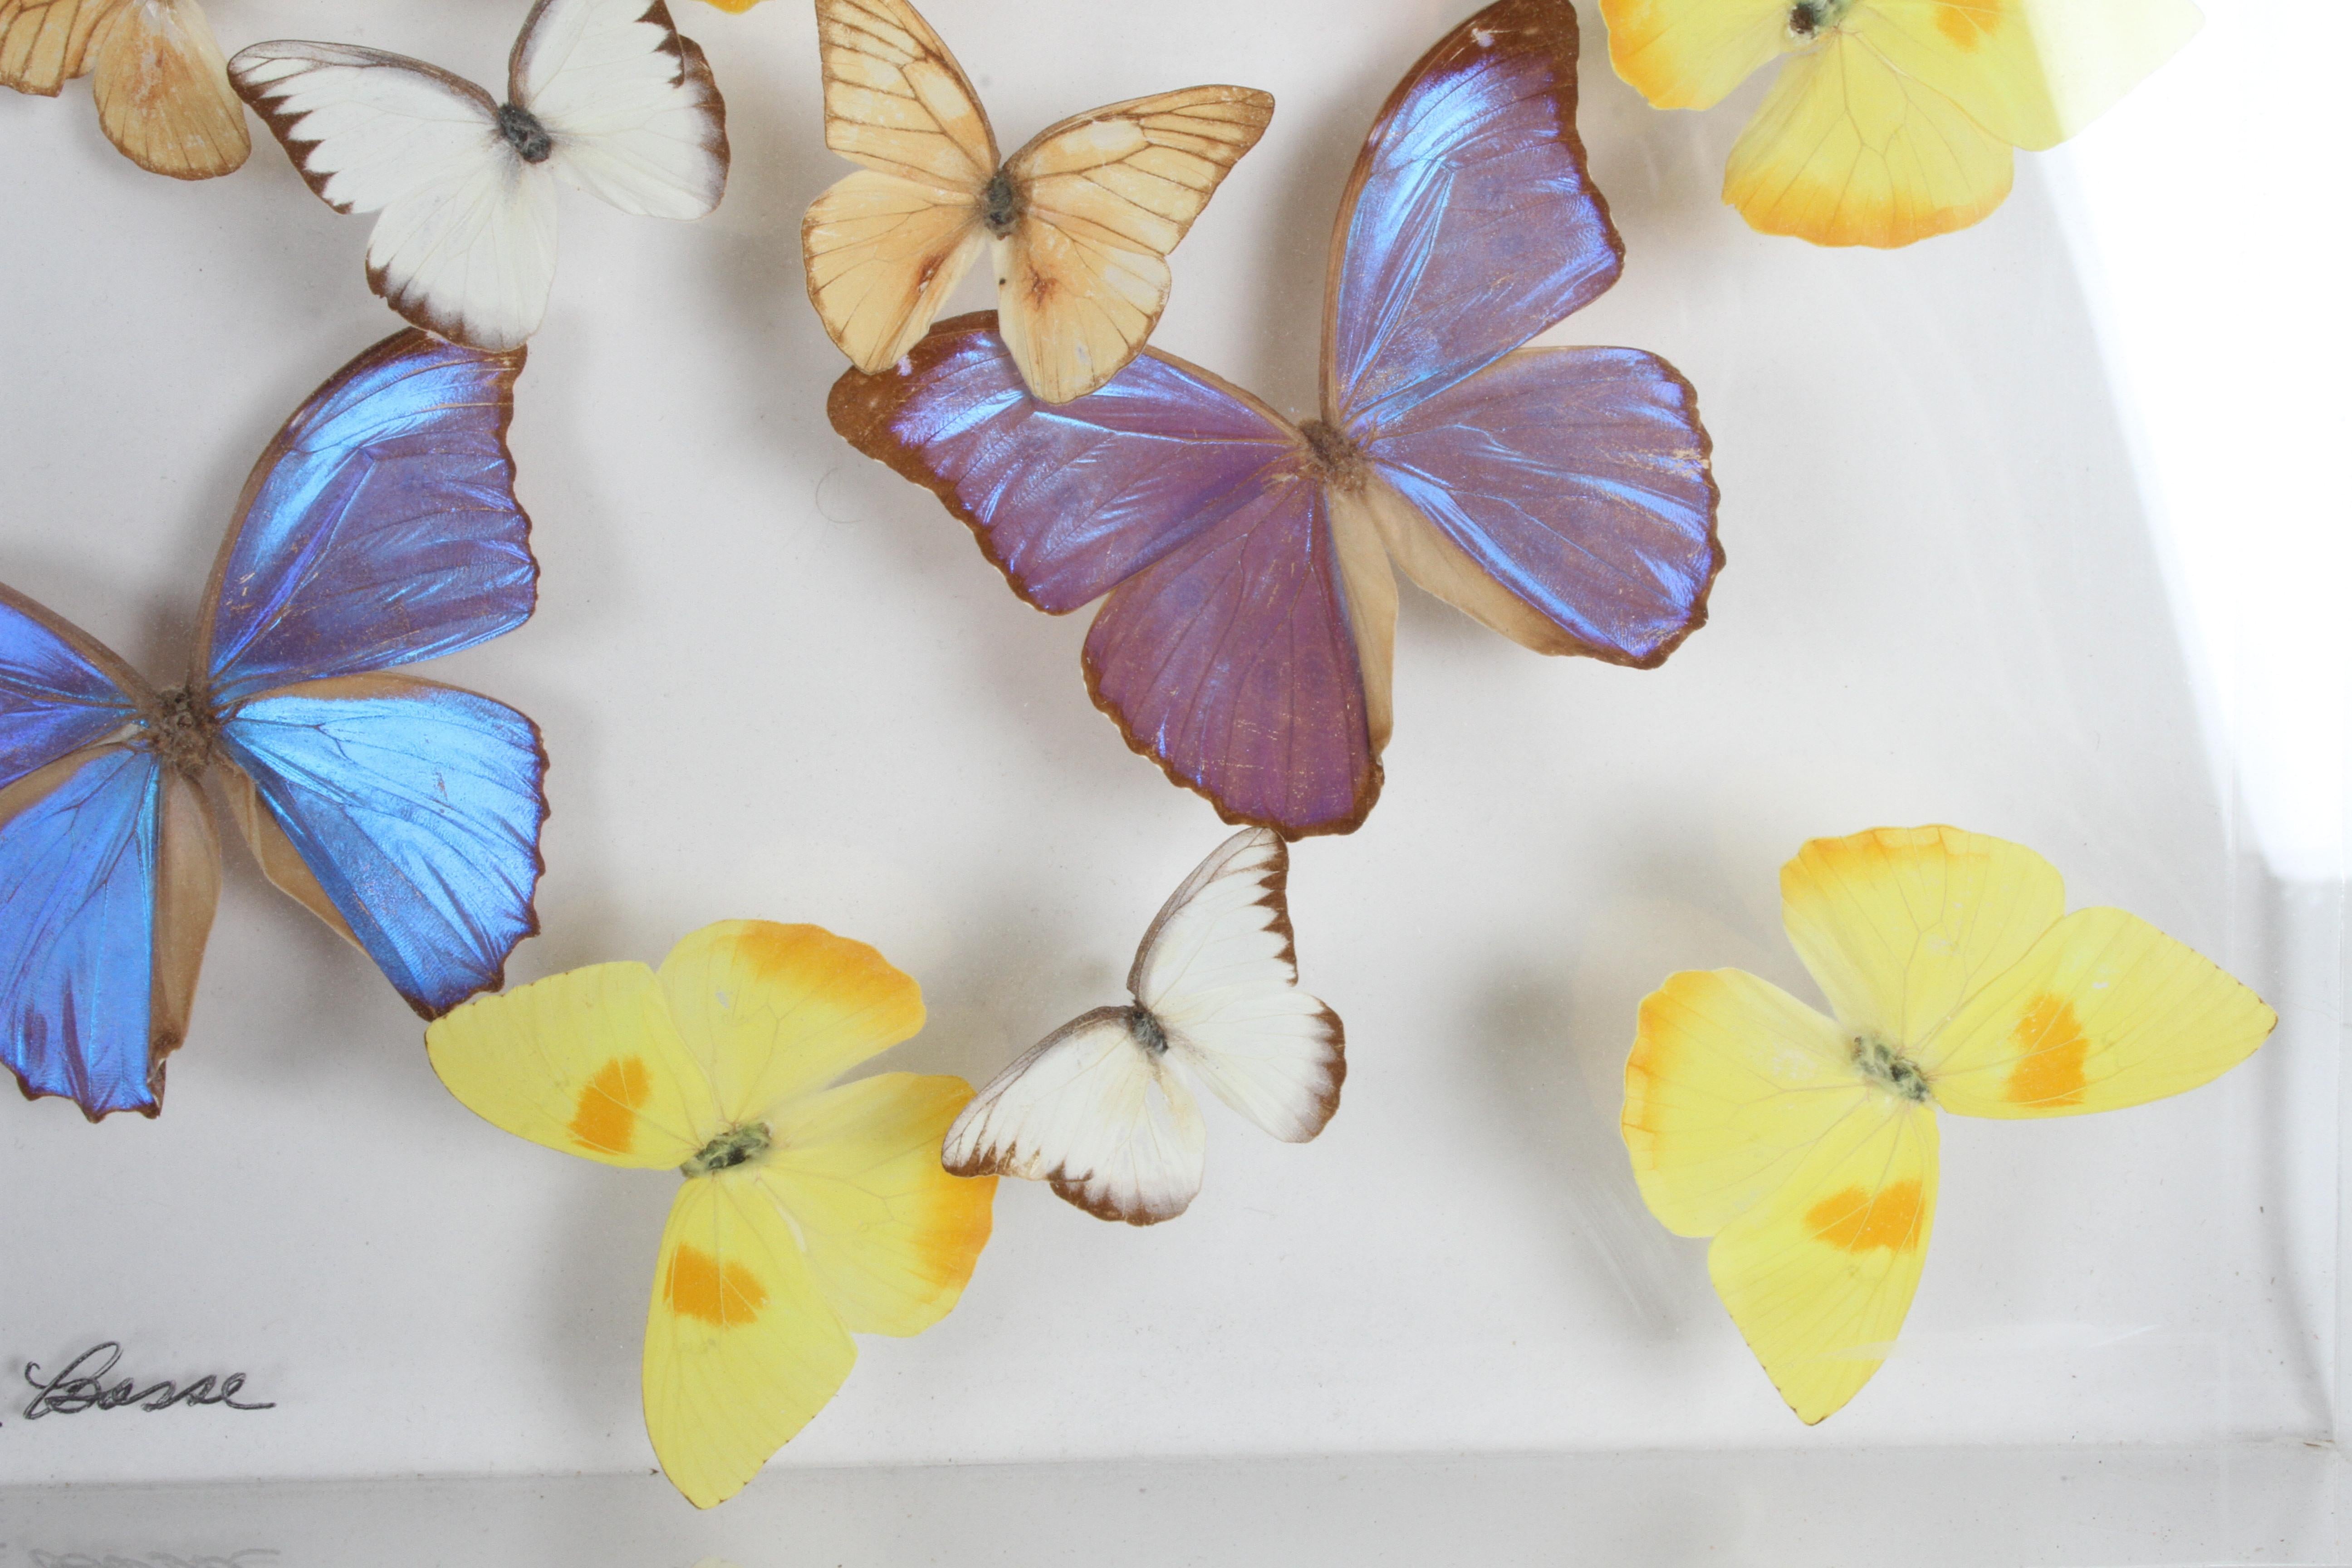 Mid-Century Modern Vintage Taxidermy Butterfly Collection in Lucite Display Signed by Linda Bosse For Sale